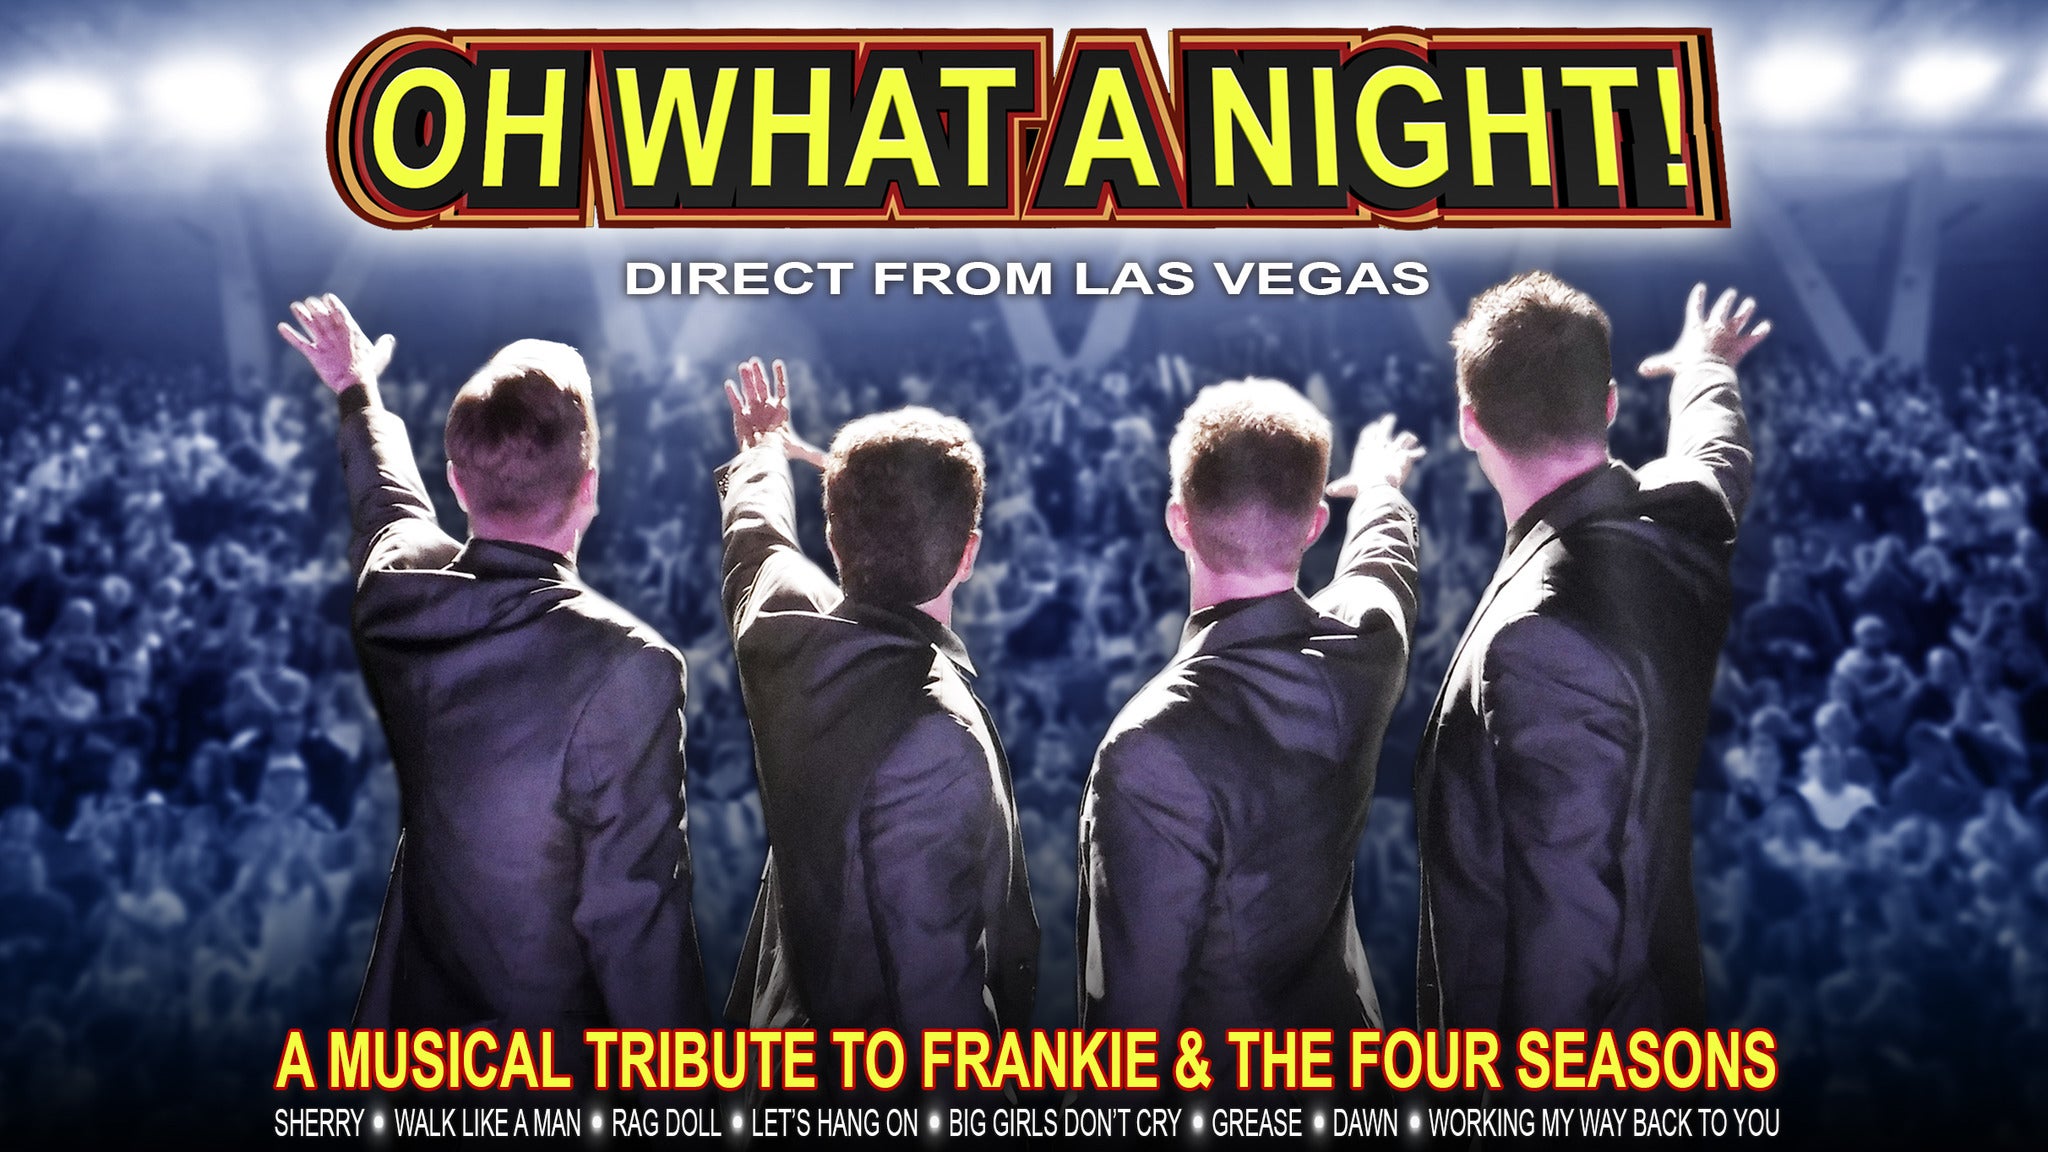 "Oh What A Night!" A Musical Tribute to Frankie Valli in Rama promo photo for Casino Rama Player Card Holder presale offer code